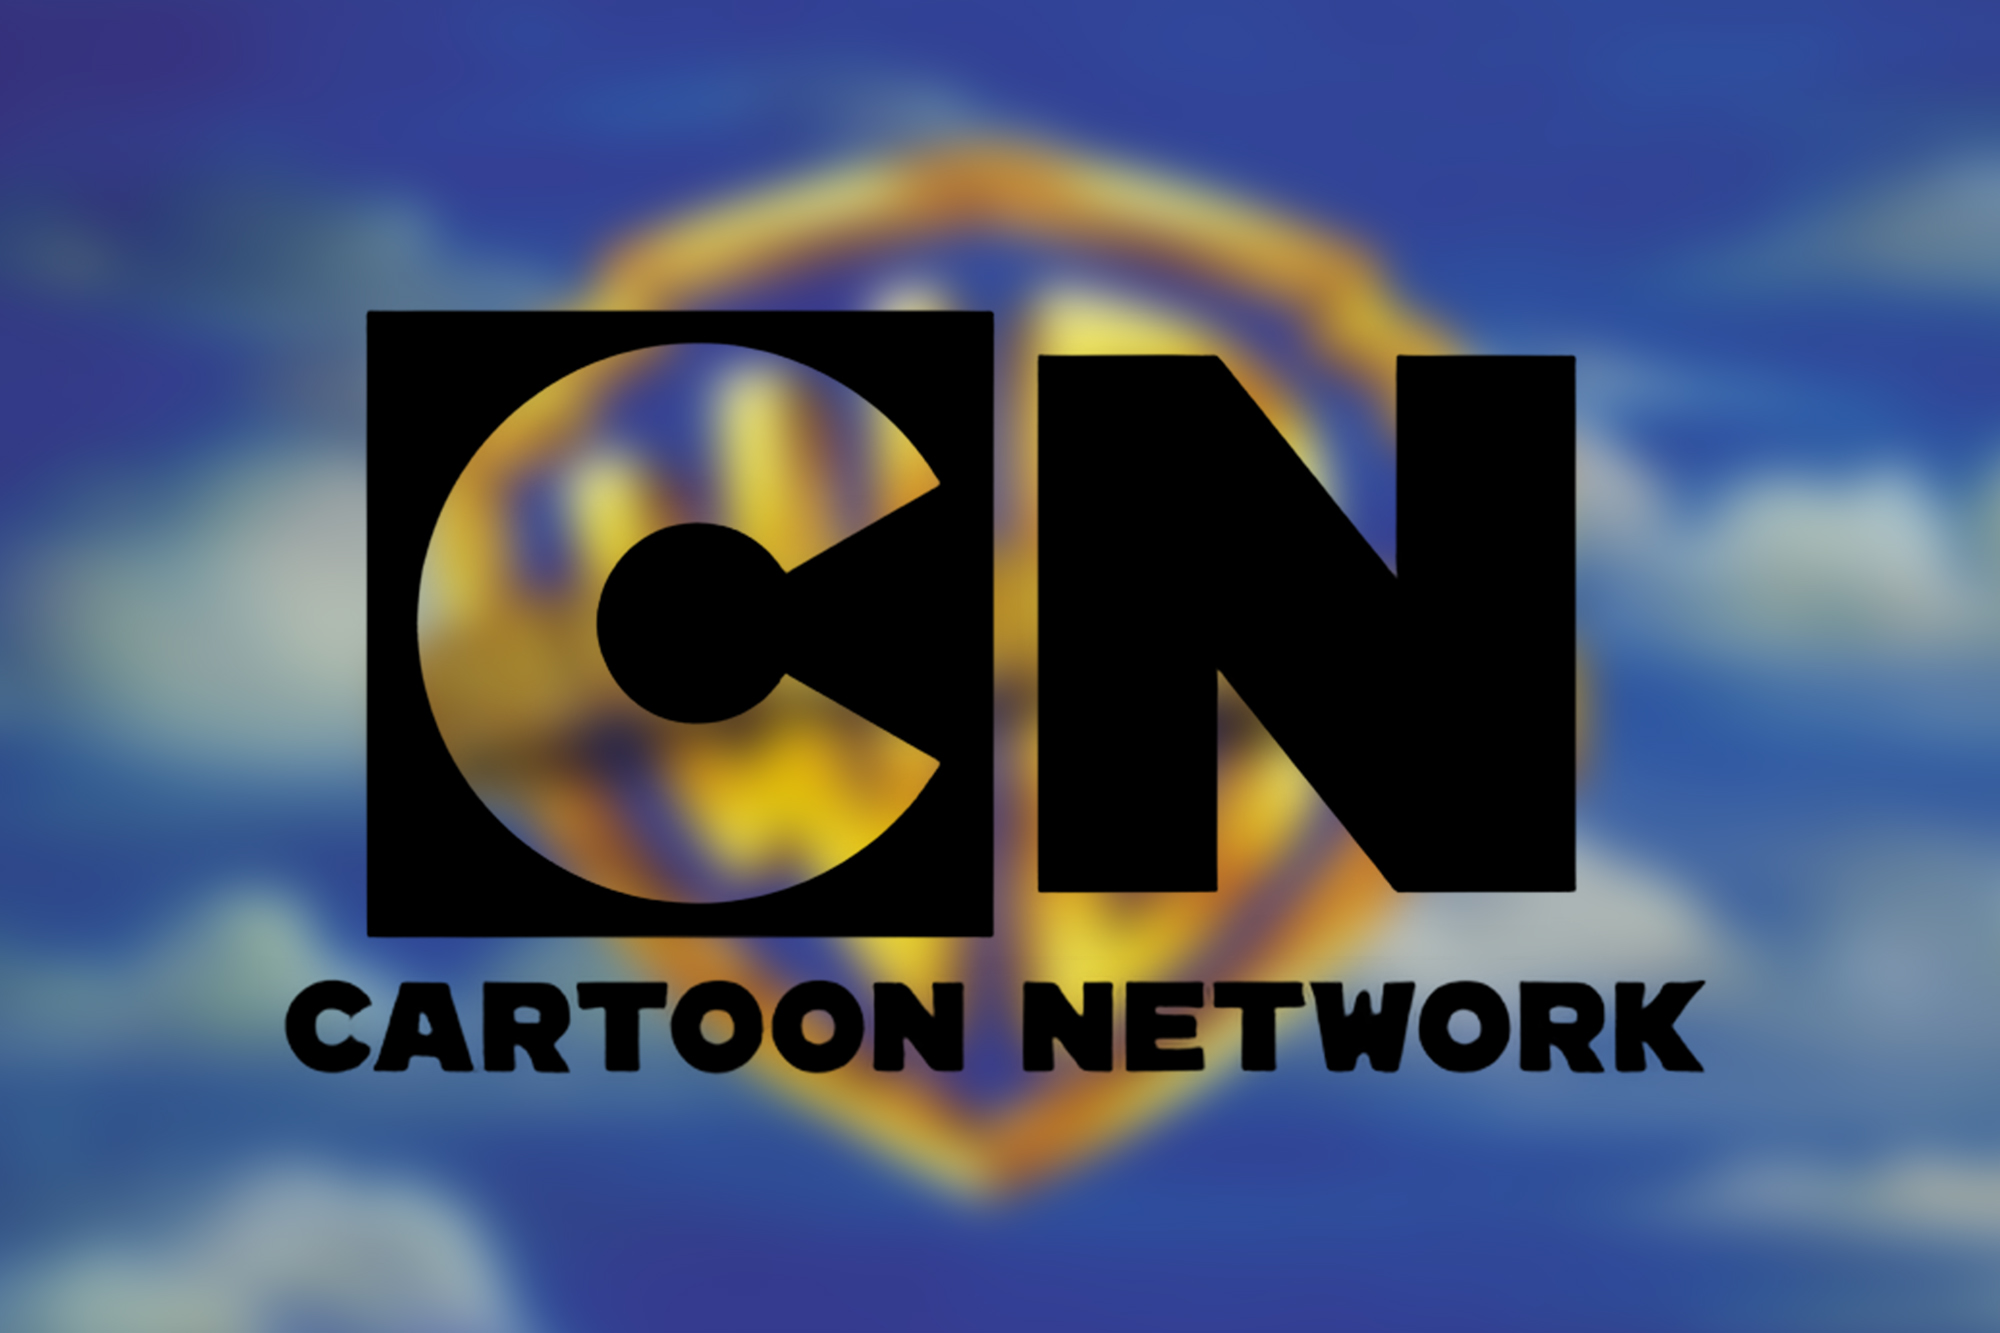 Celebrate Cartoon Network's 30th anniversary with these five cartoons